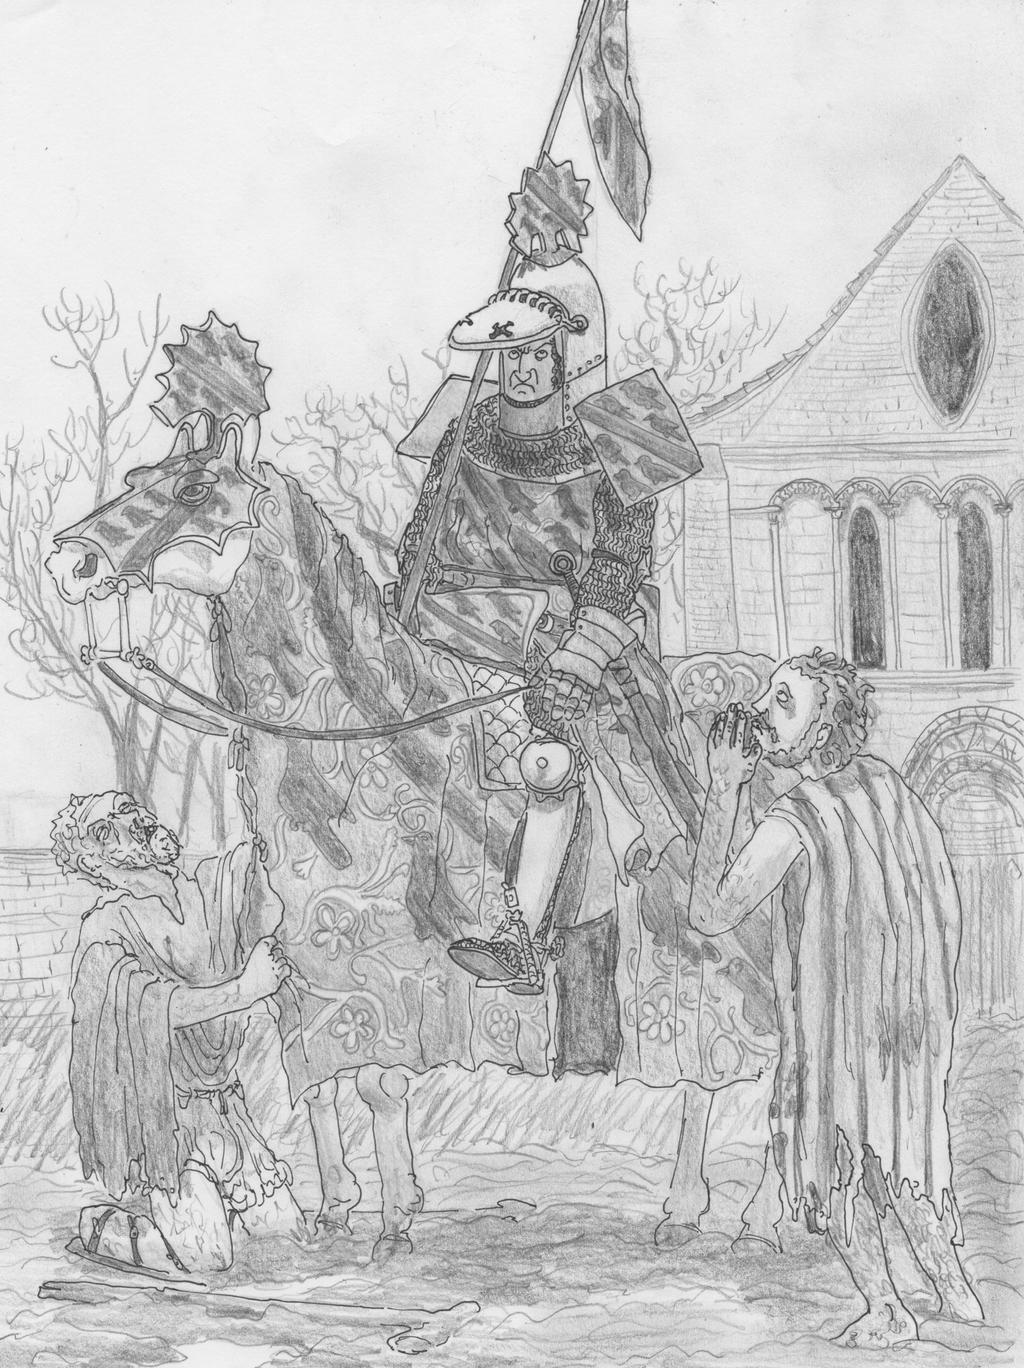 the_knight_and_the_beggars__stamford_1320_40_by_fritzvicari-d7h908q.jpg